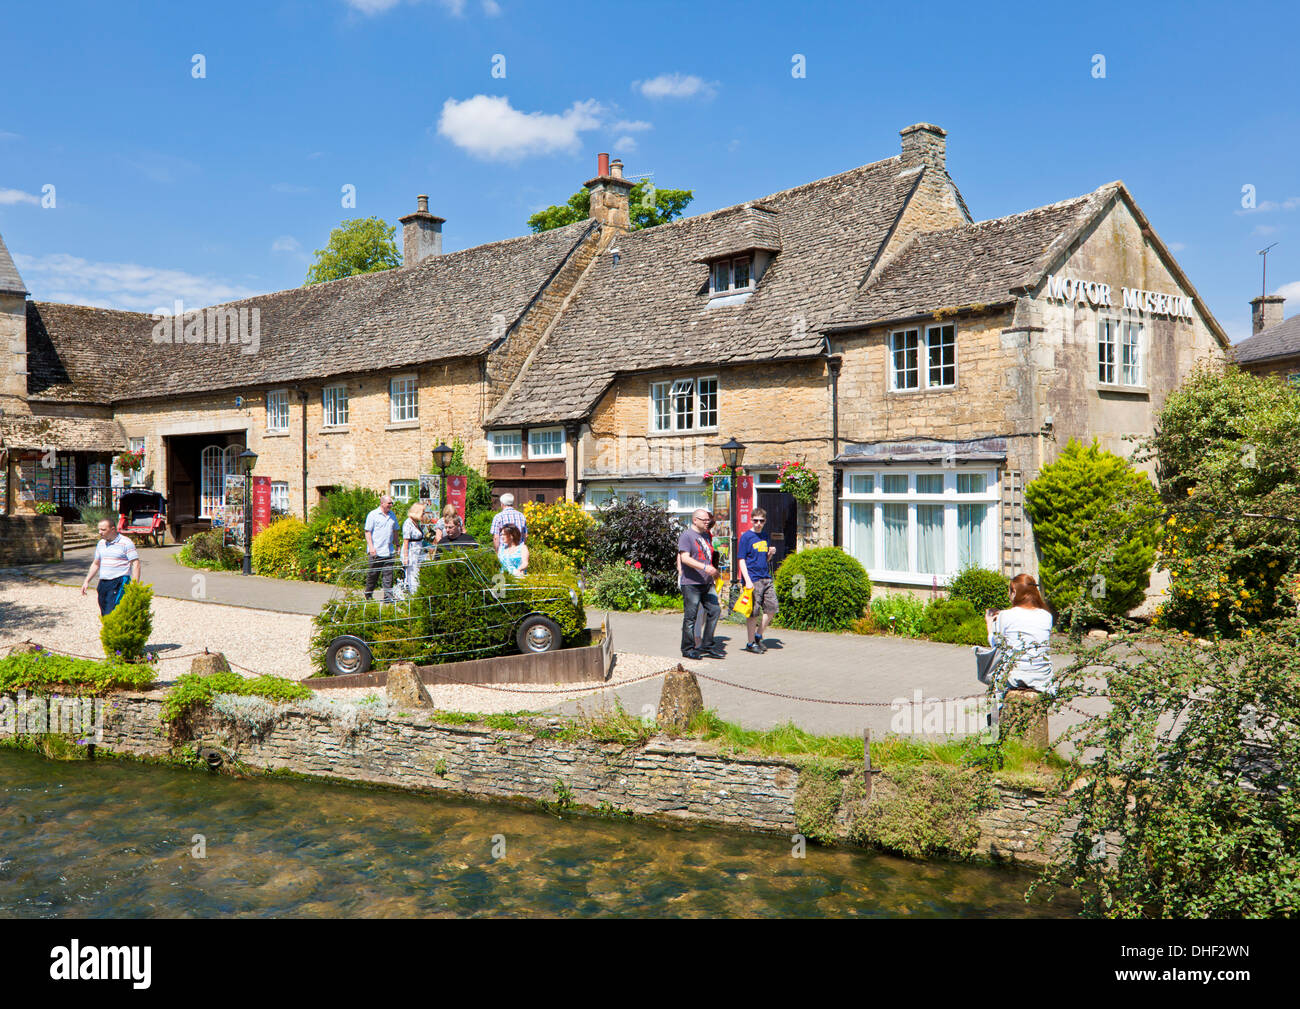 Cotswolds Village in Bourton on the Water das Cotswold Motoring Museum in Bourton on the Water Cotswolds Gloucestershire England UK GB Europe Stockfoto